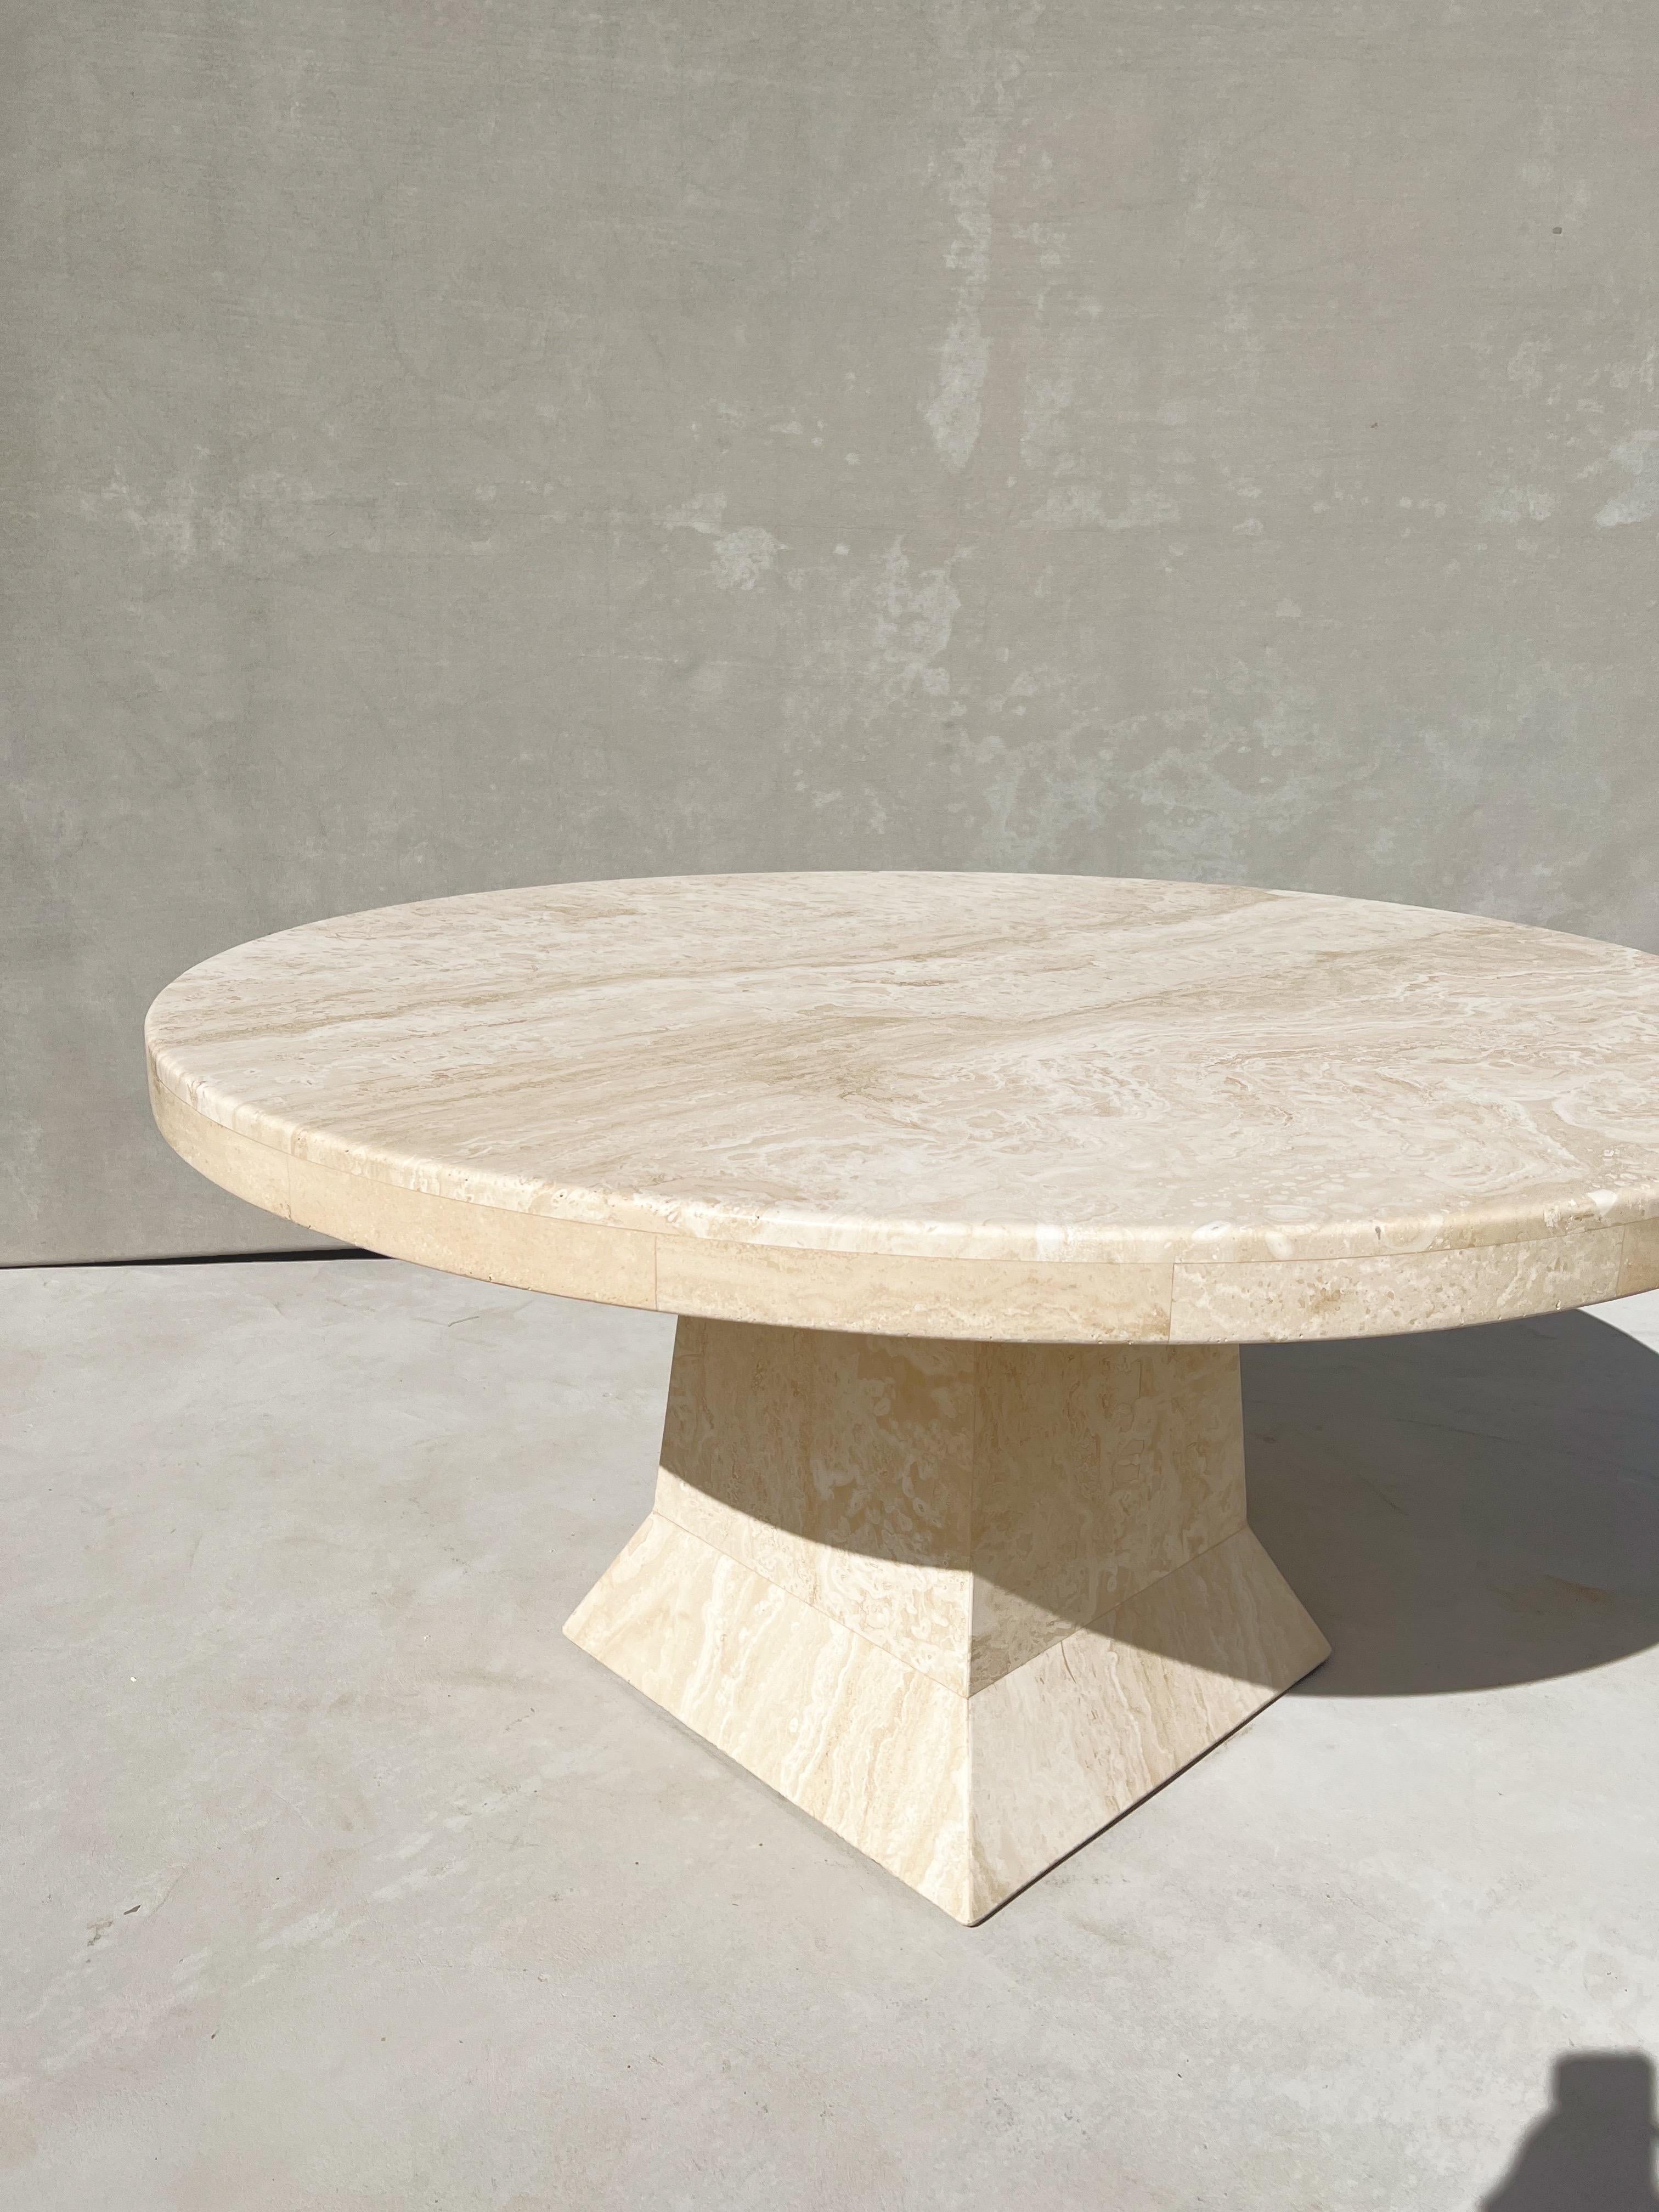 20th Century Vintage Modern Italian Travertine Round Dining Table with a Sculptural Base